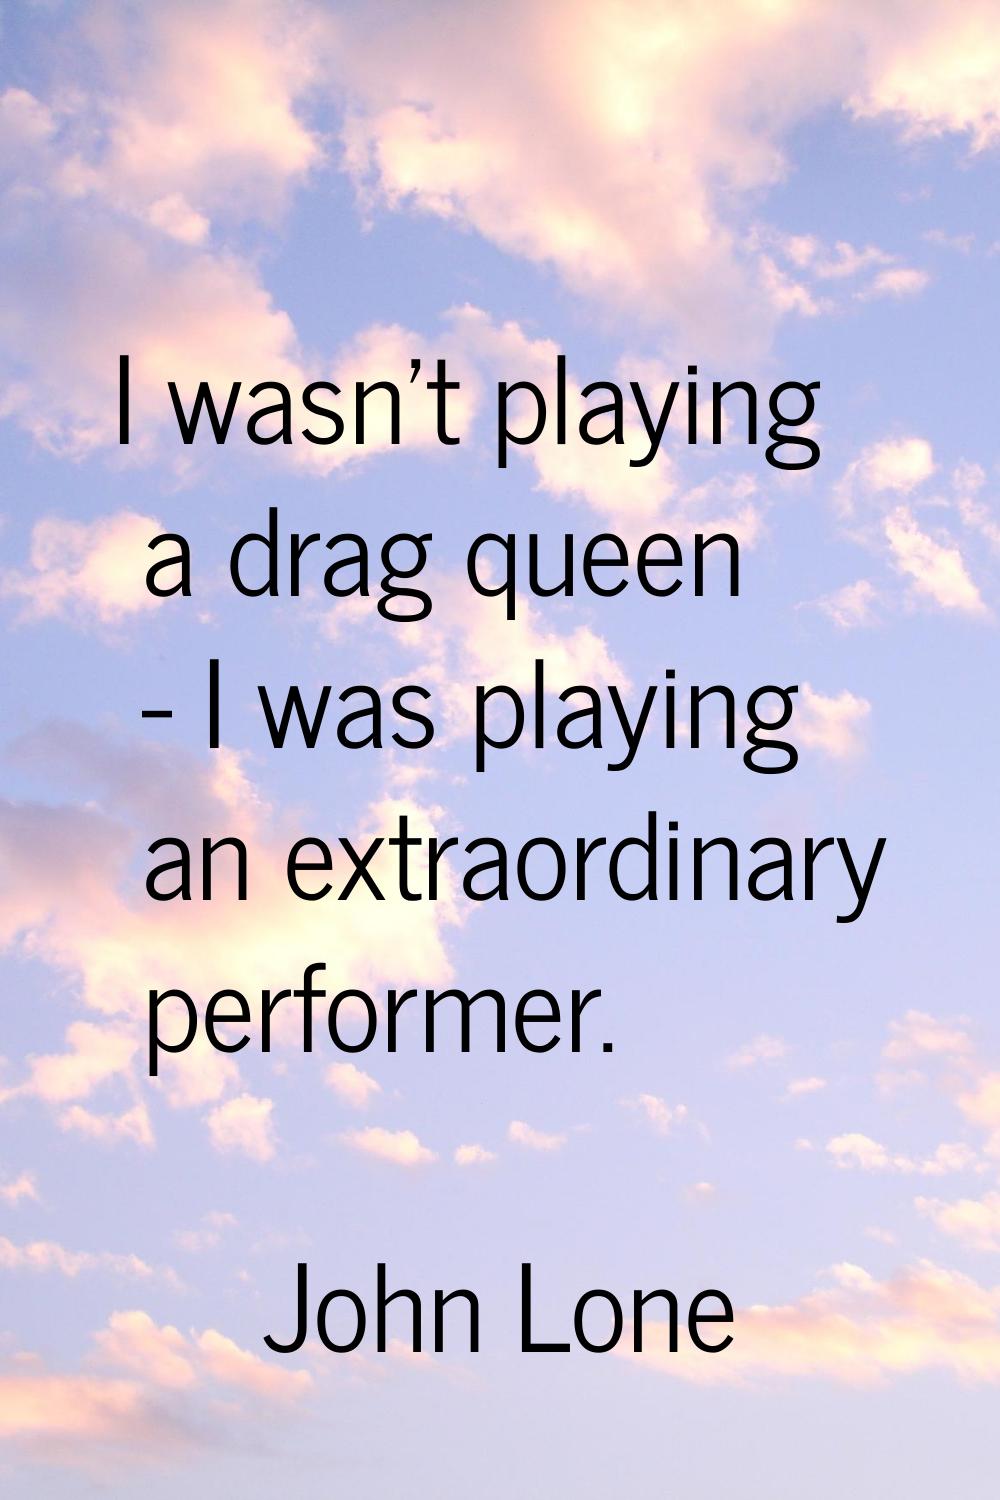 I wasn't playing a drag queen - I was playing an extraordinary performer.